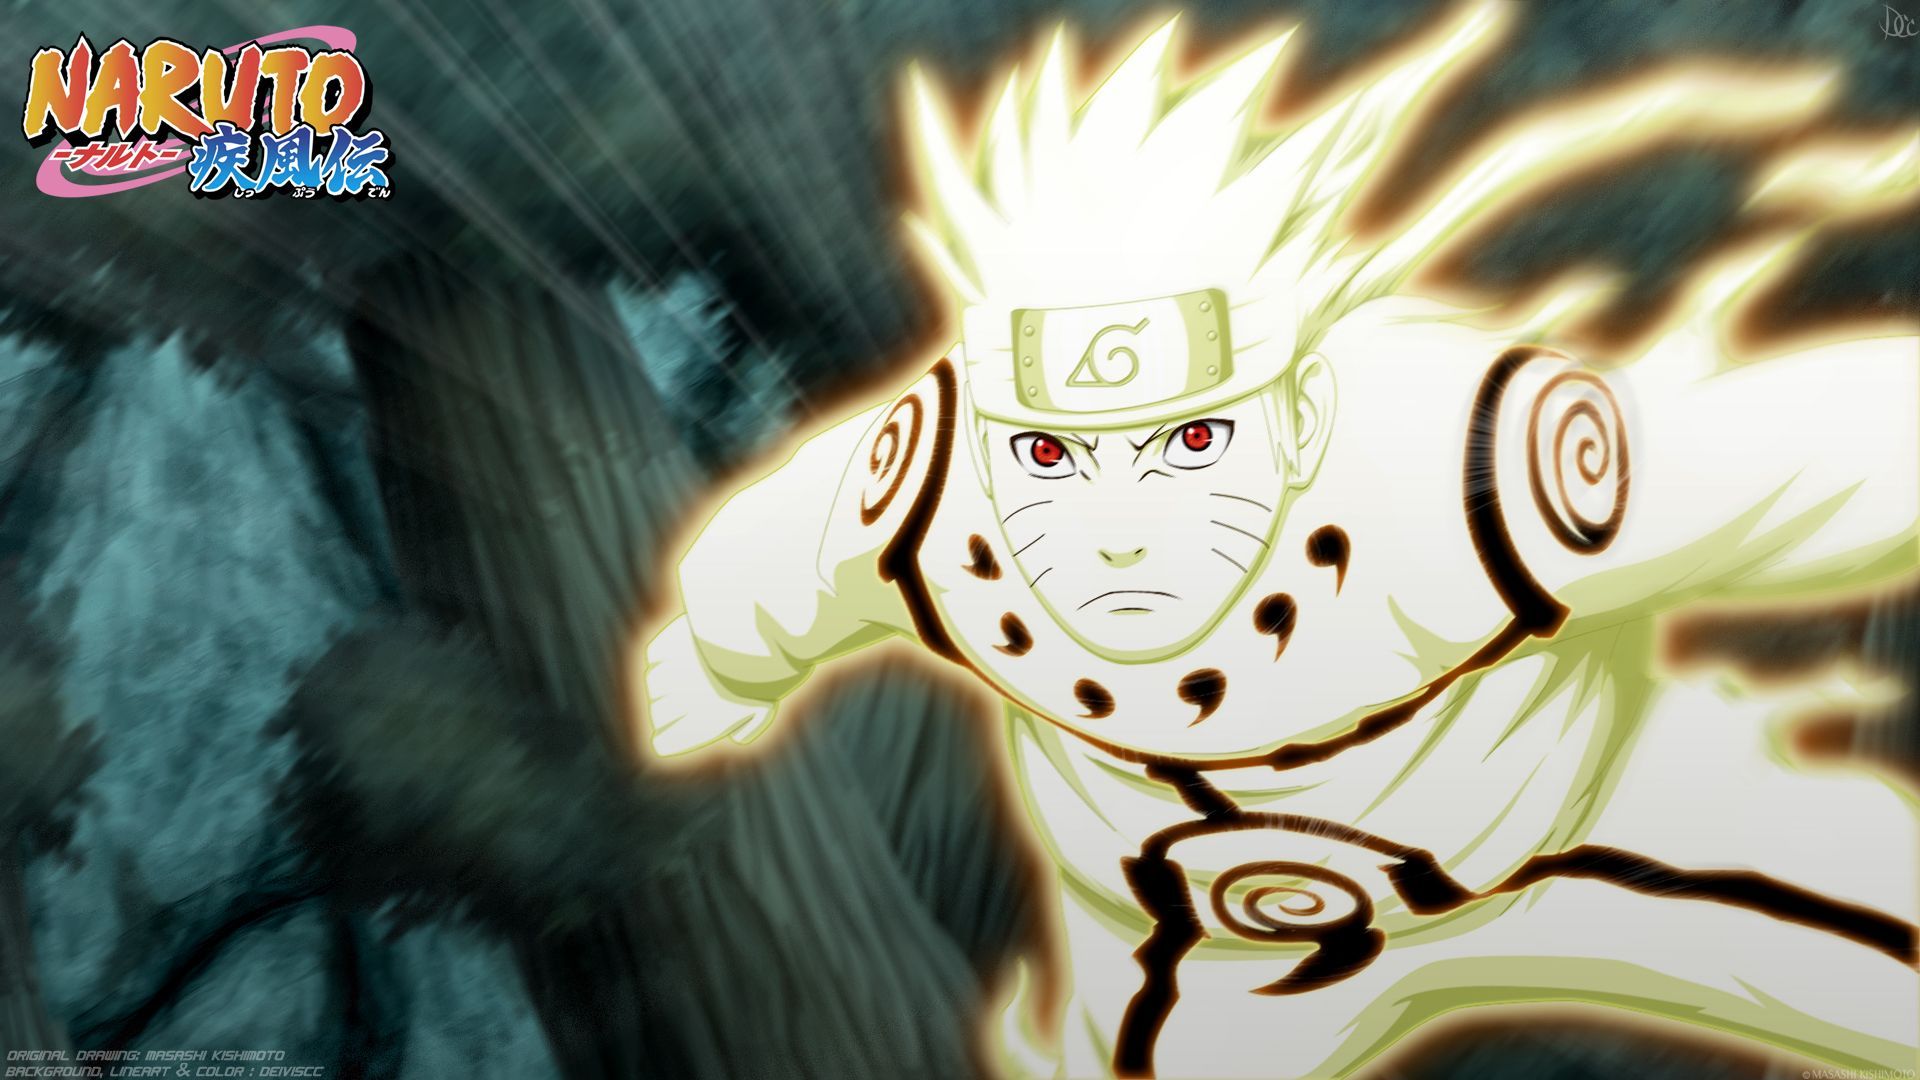 Naruto Shippuden wallpapers HD | Wallpapers, Backgrounds, Images ...